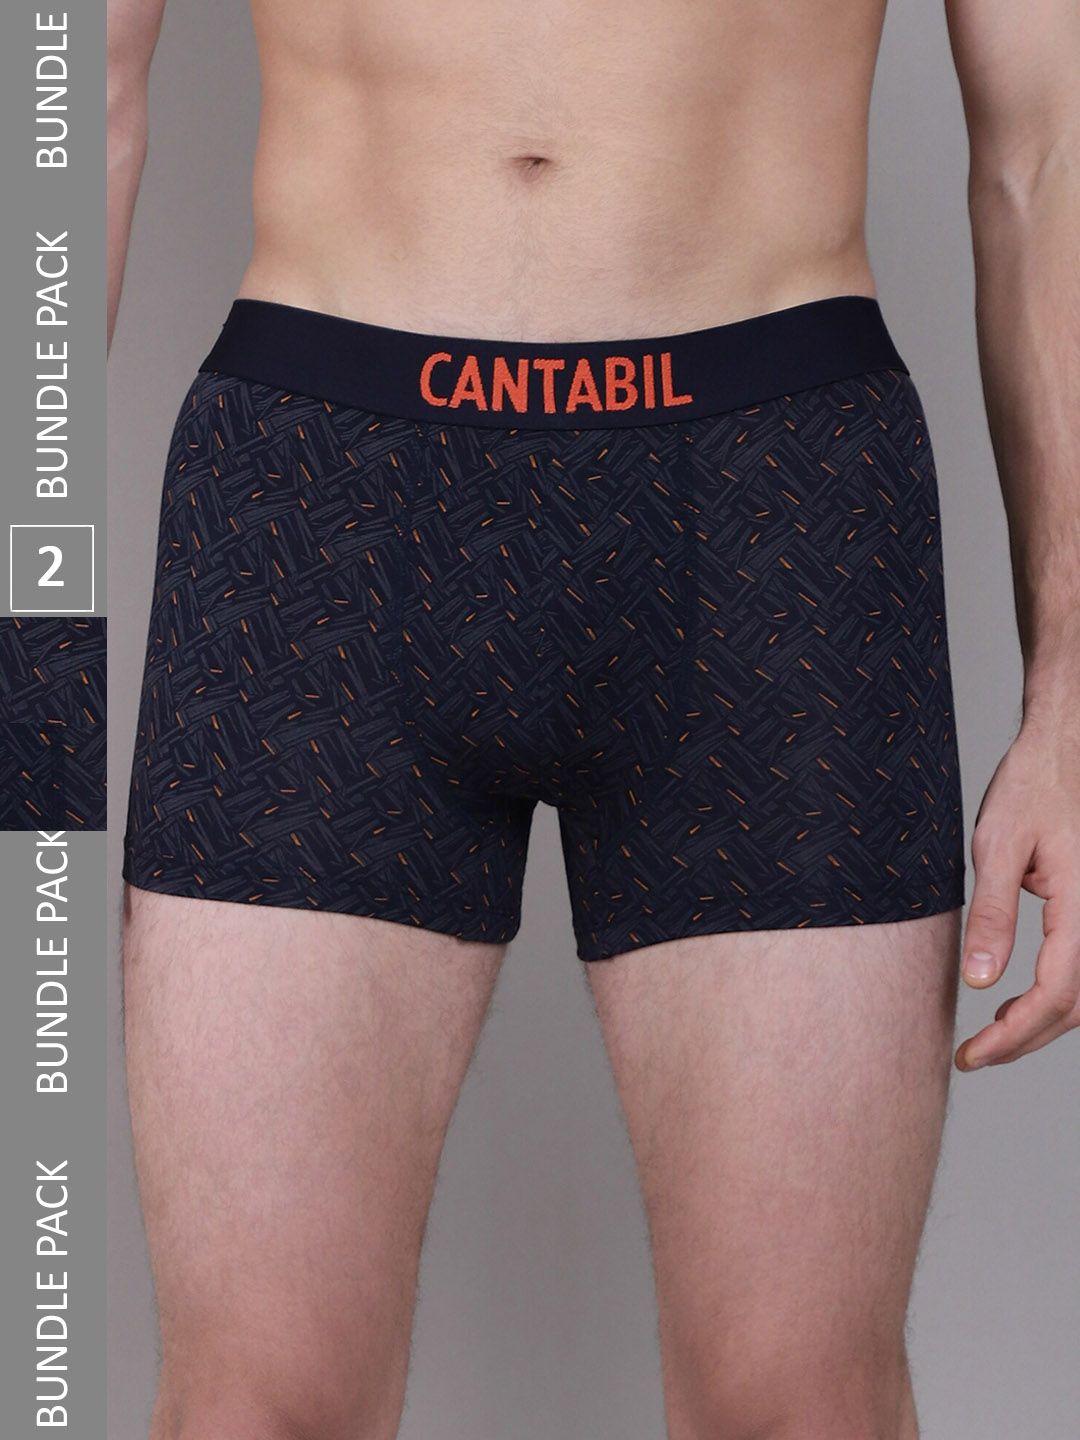 cantabil pack of 2 printed basic briefs mbrf00029_navy_p2